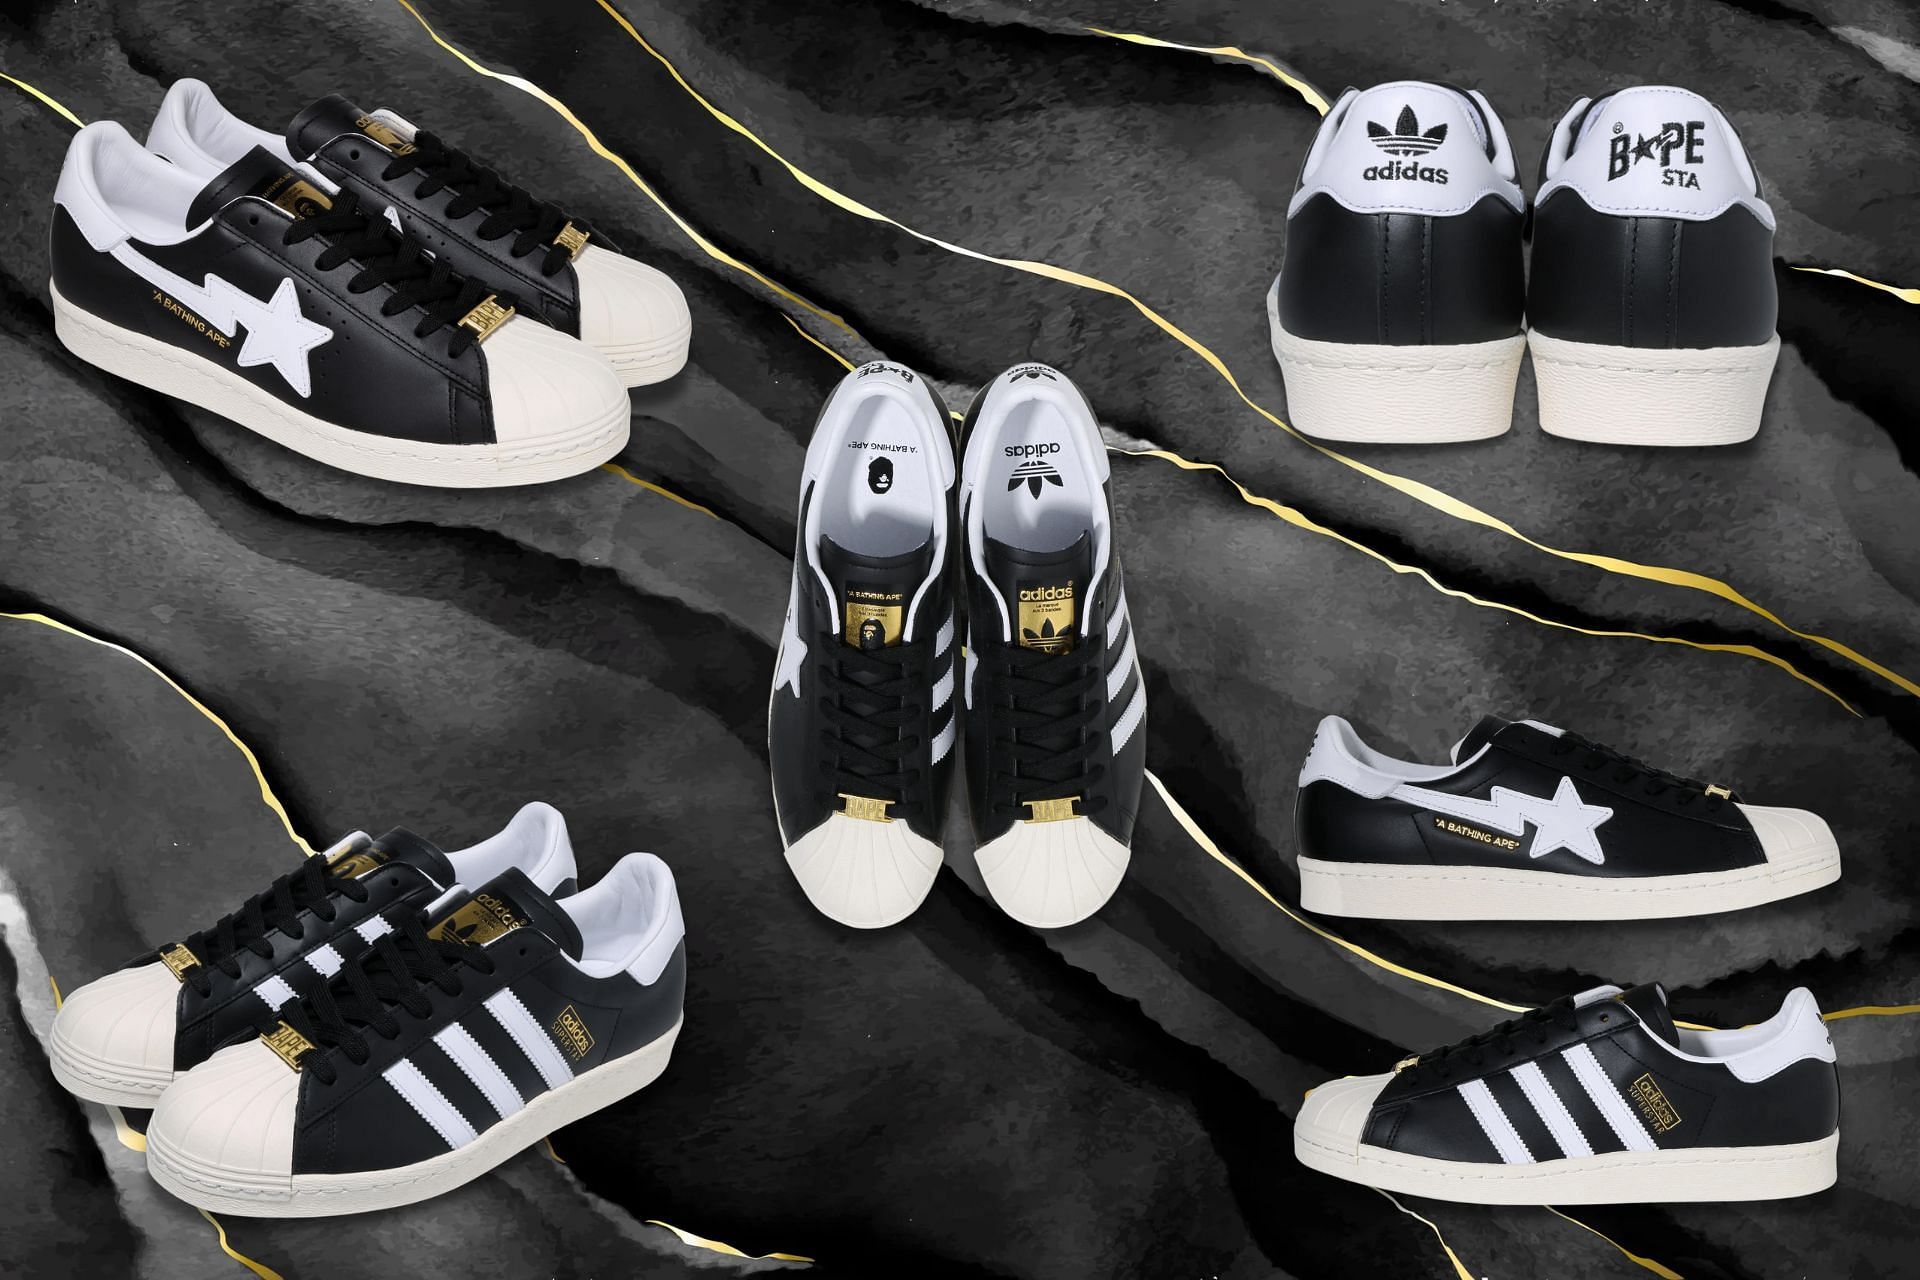 Intervenere sofa bronze Where to buy A Bathing Ape x Adidas Originals sneakers? Price, release  date, and more explored